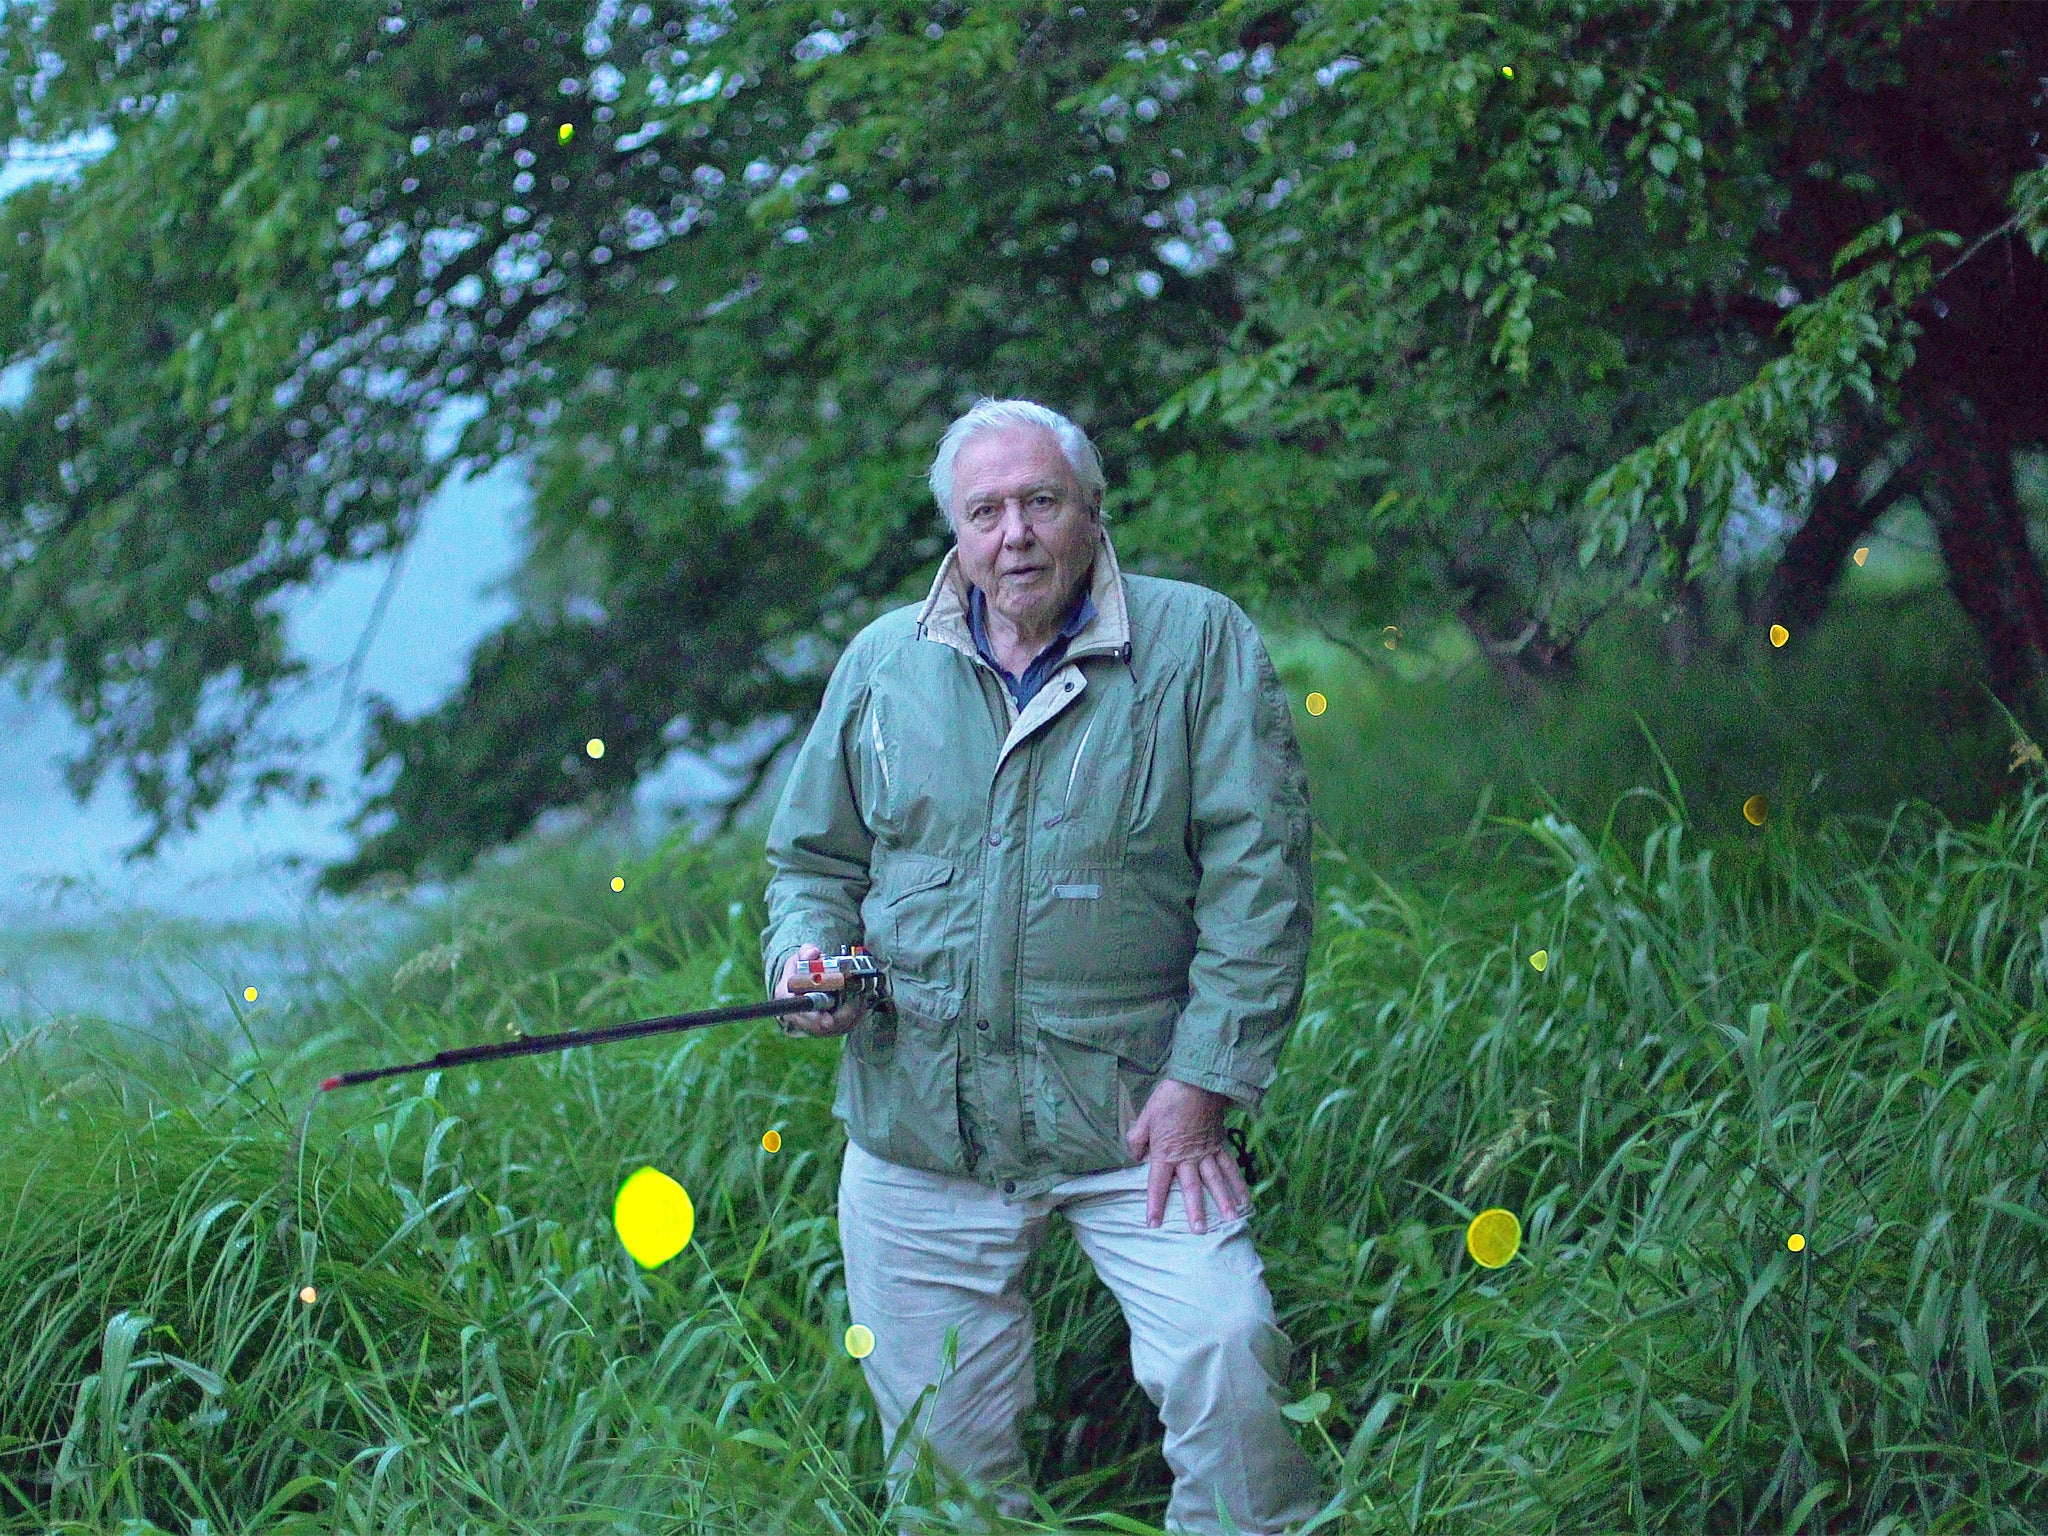 Sir David operating a 'firefly fishing rod' during the new series